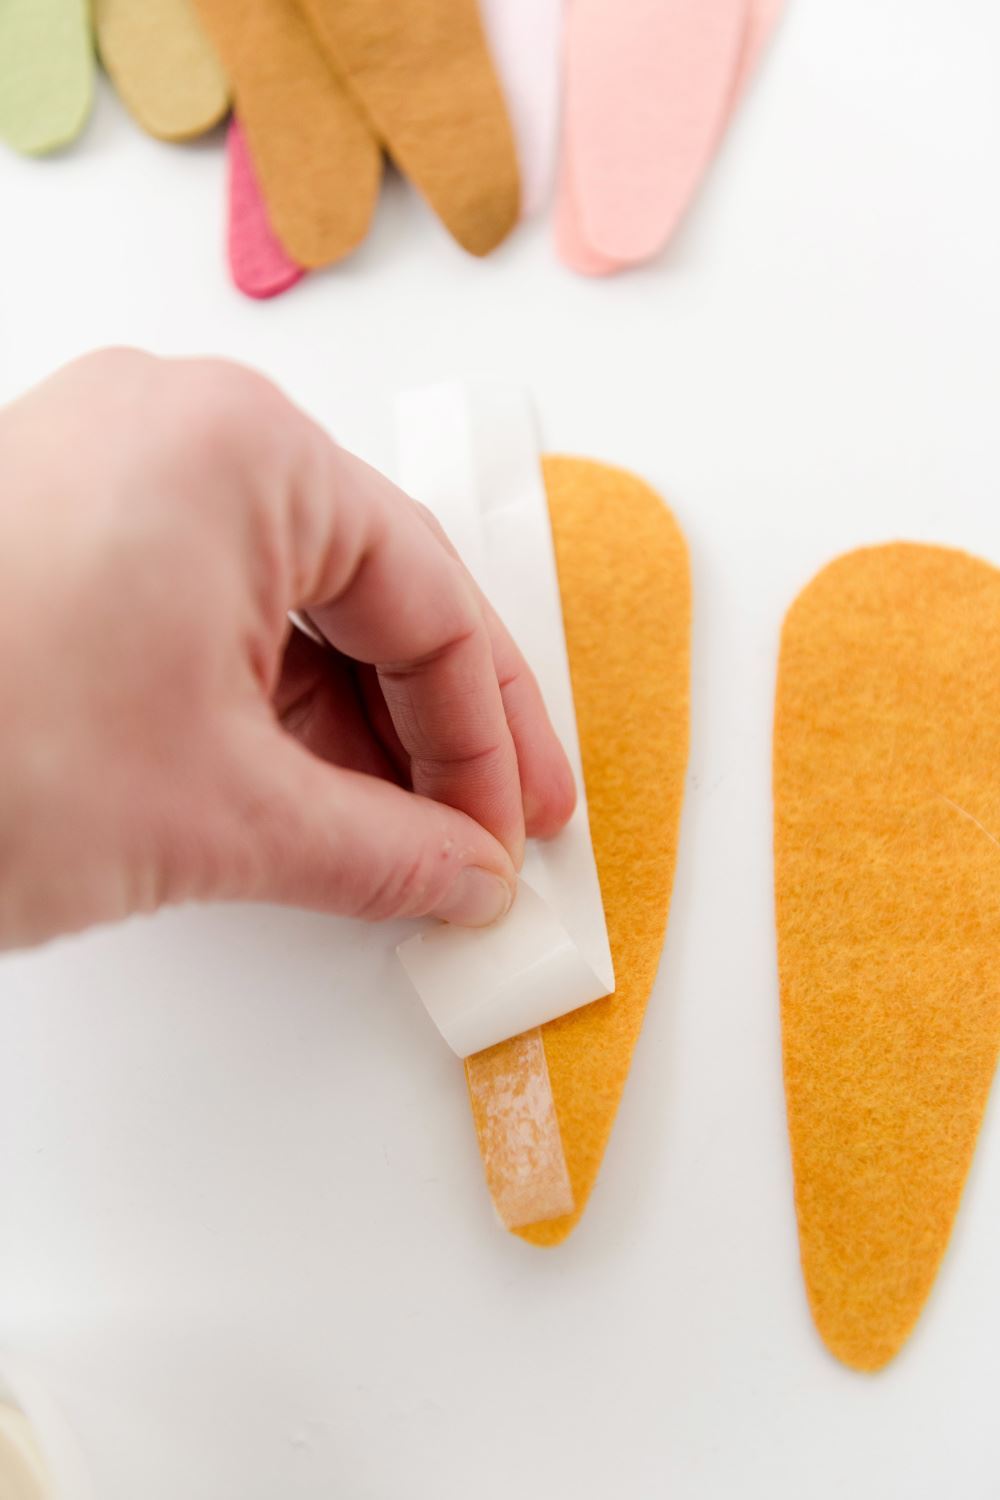 Apply Fabric Tape to the edges of the carrot